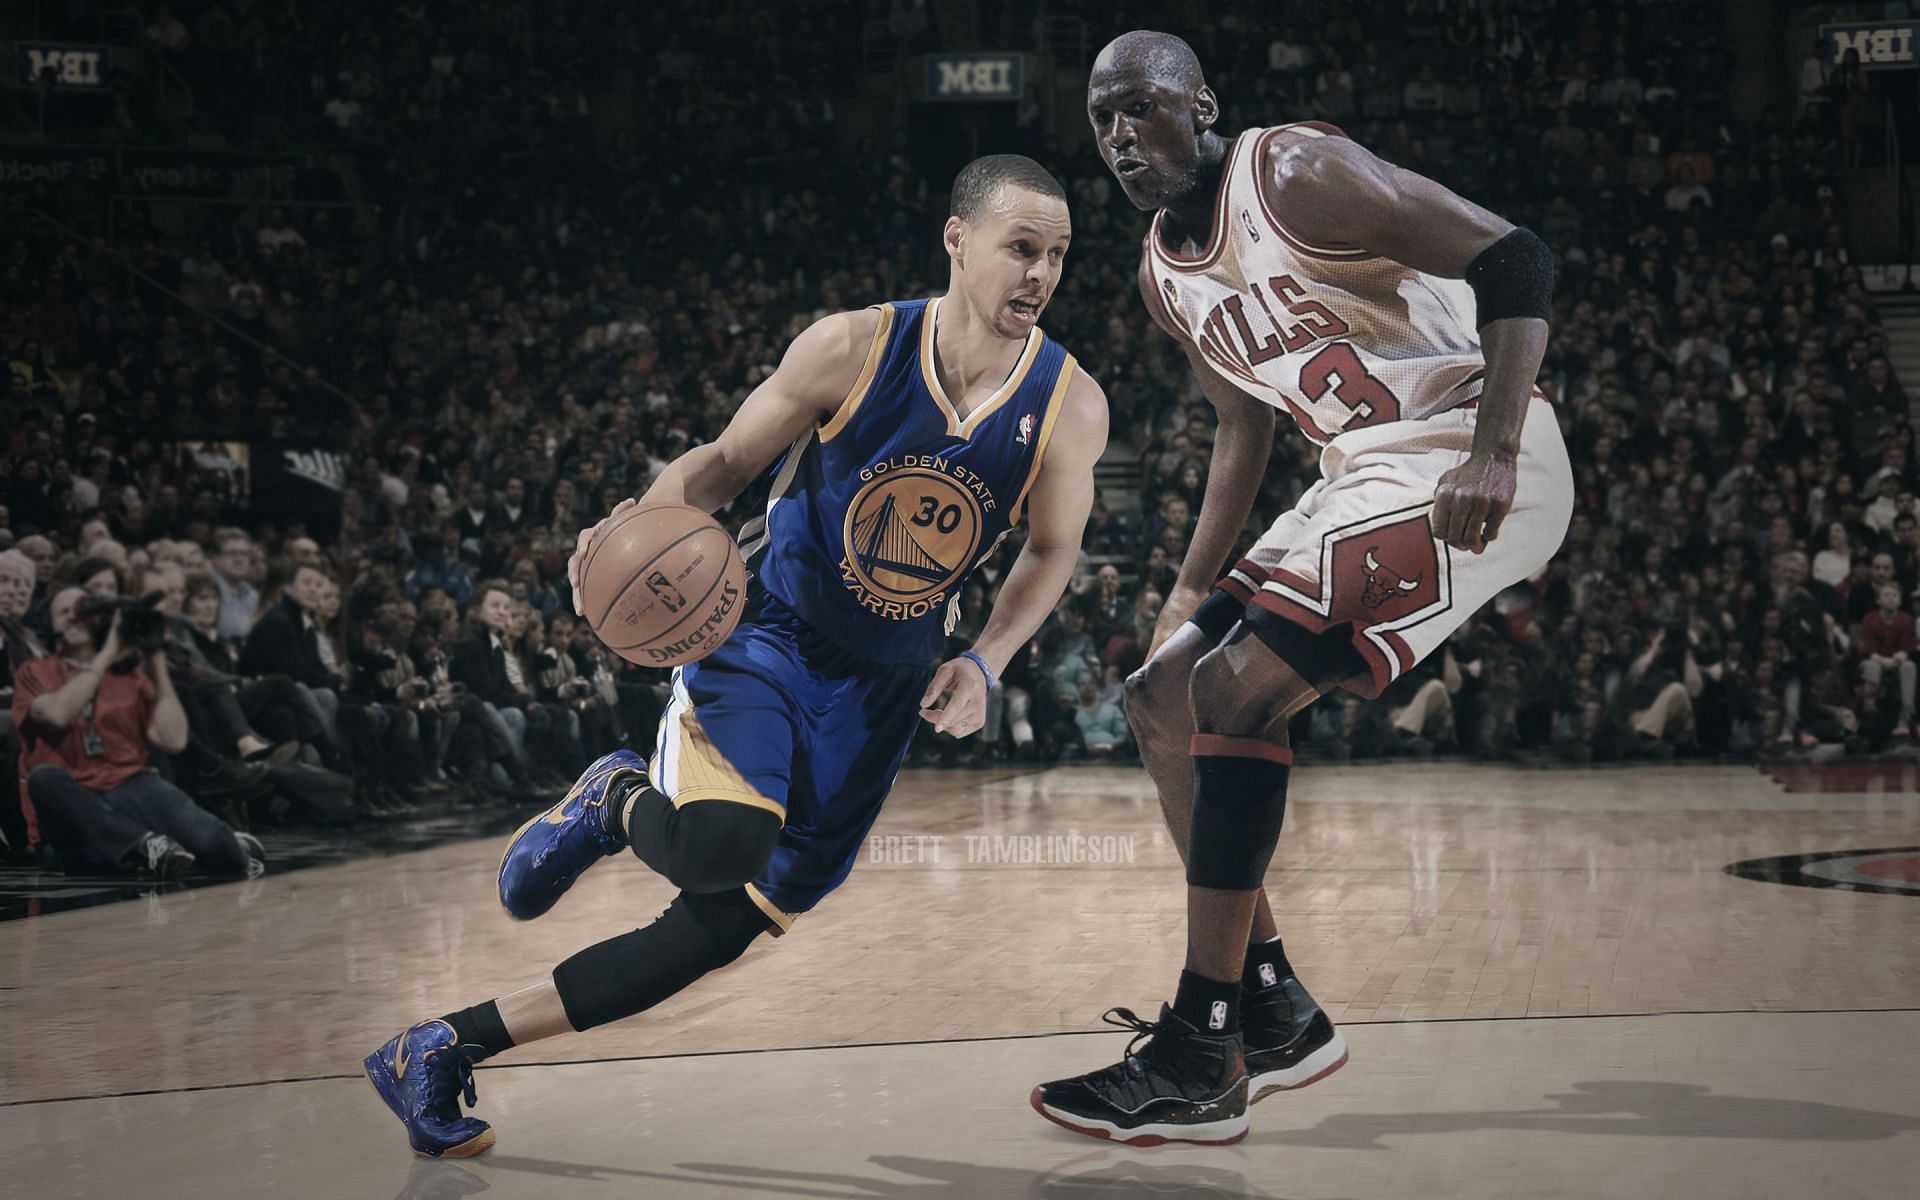 Michael Jordan of the Chicago Bulls and Steph Curry of the Golden State Warriors [Photo: Weebly]